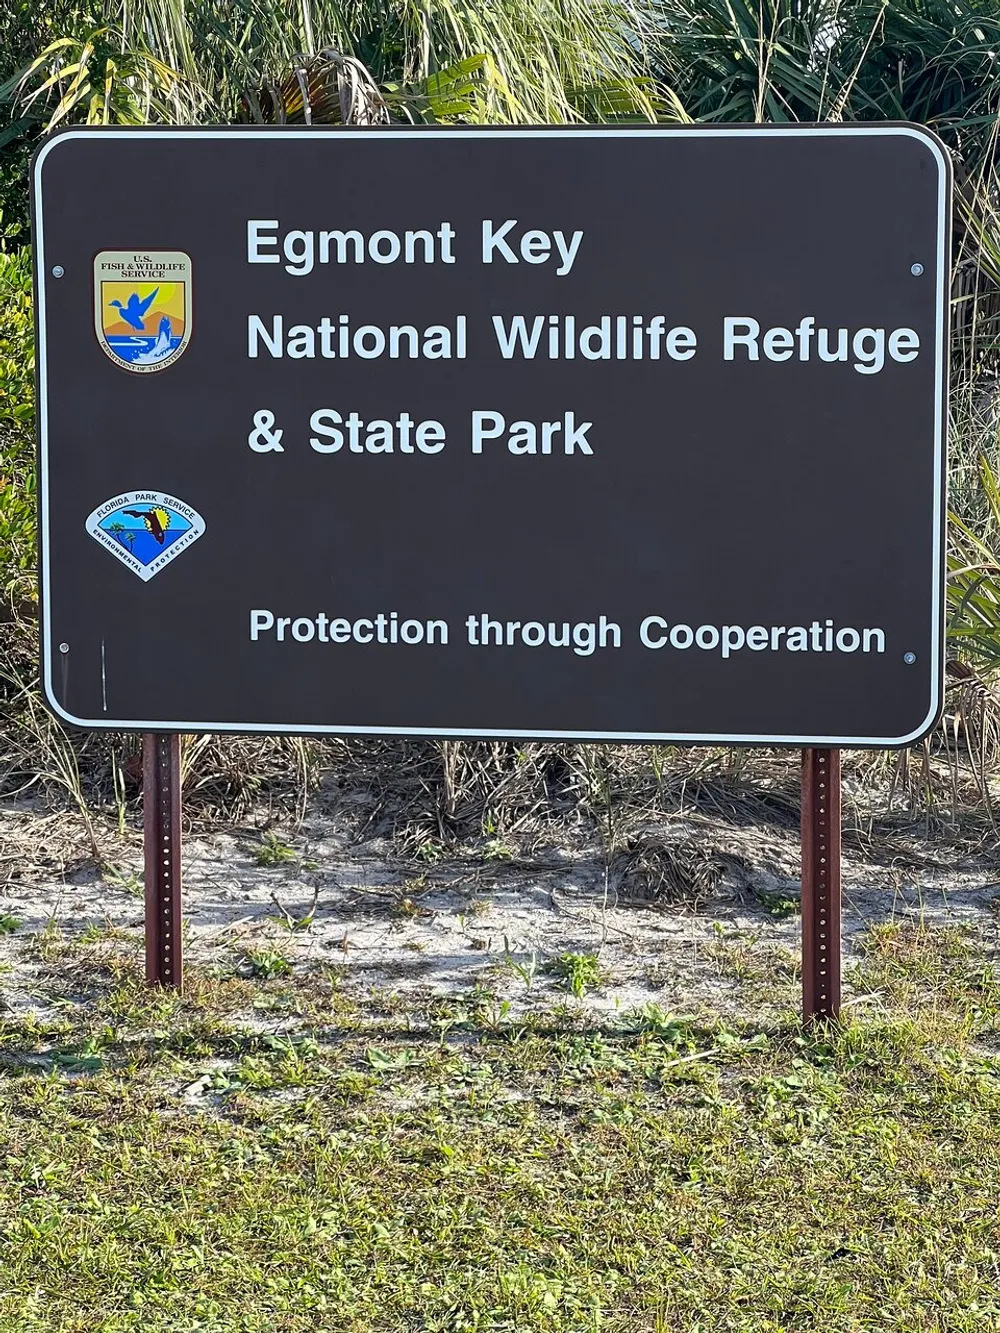 The image shows a sign for Egmont Key National Wildlife Refuge  State Park with a motto Protection through Cooperation and logos of the US Fish  Wildlife Service and Florida Park Service